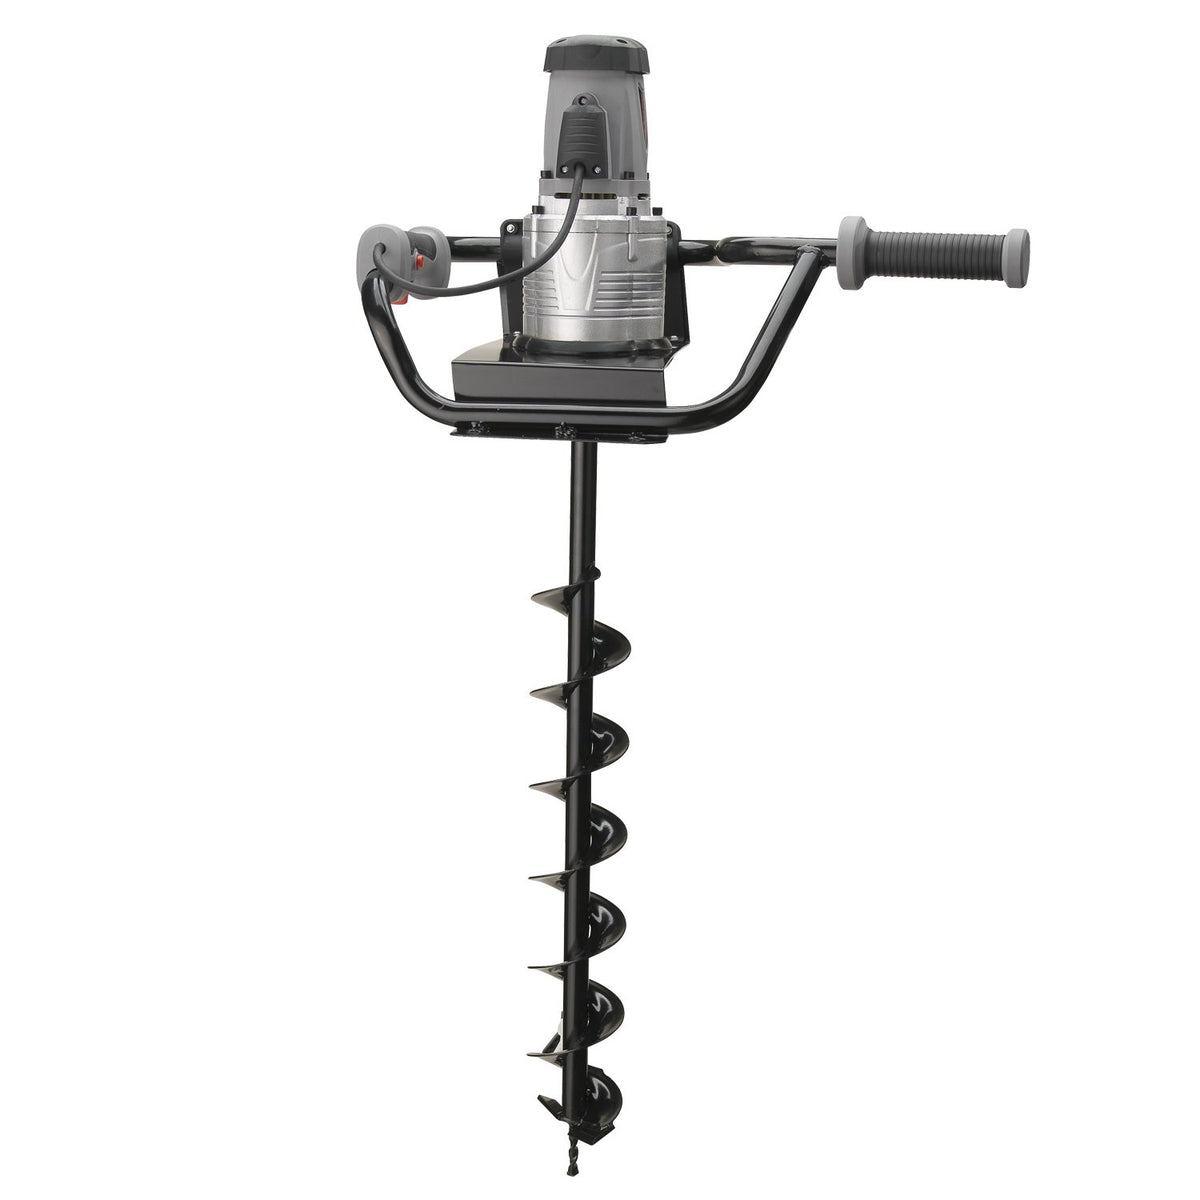 Electric Earth Auger Post Hole Digger with 4 Inch Bit | 1,200W and 1.6HP Powerhead